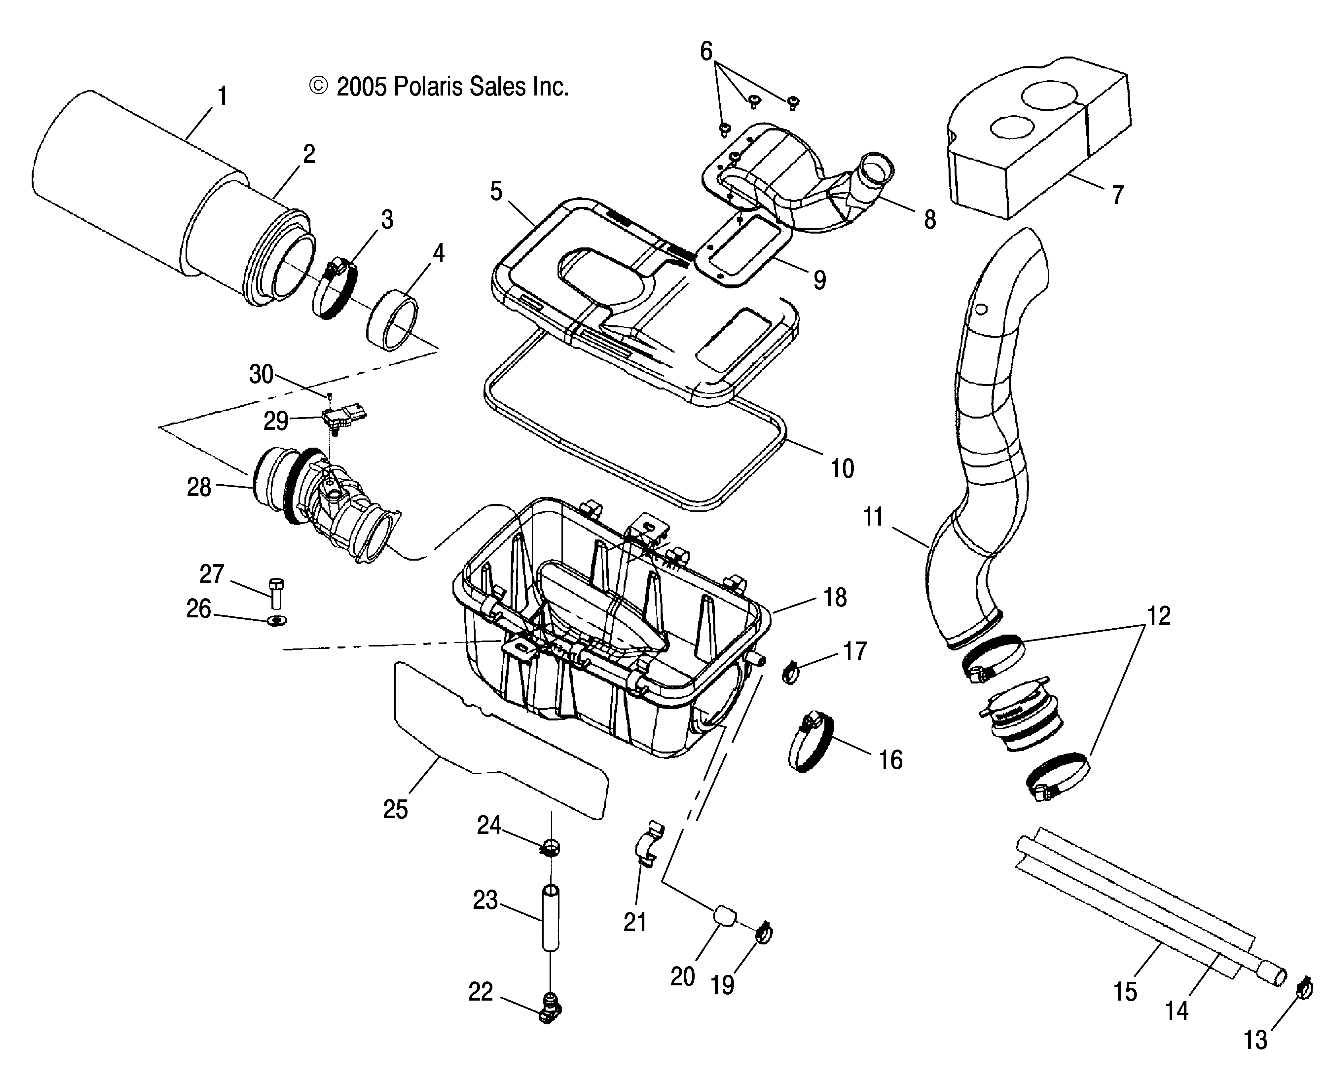 Part Number : 5412985 EFI BODY THROTTLE BOOT